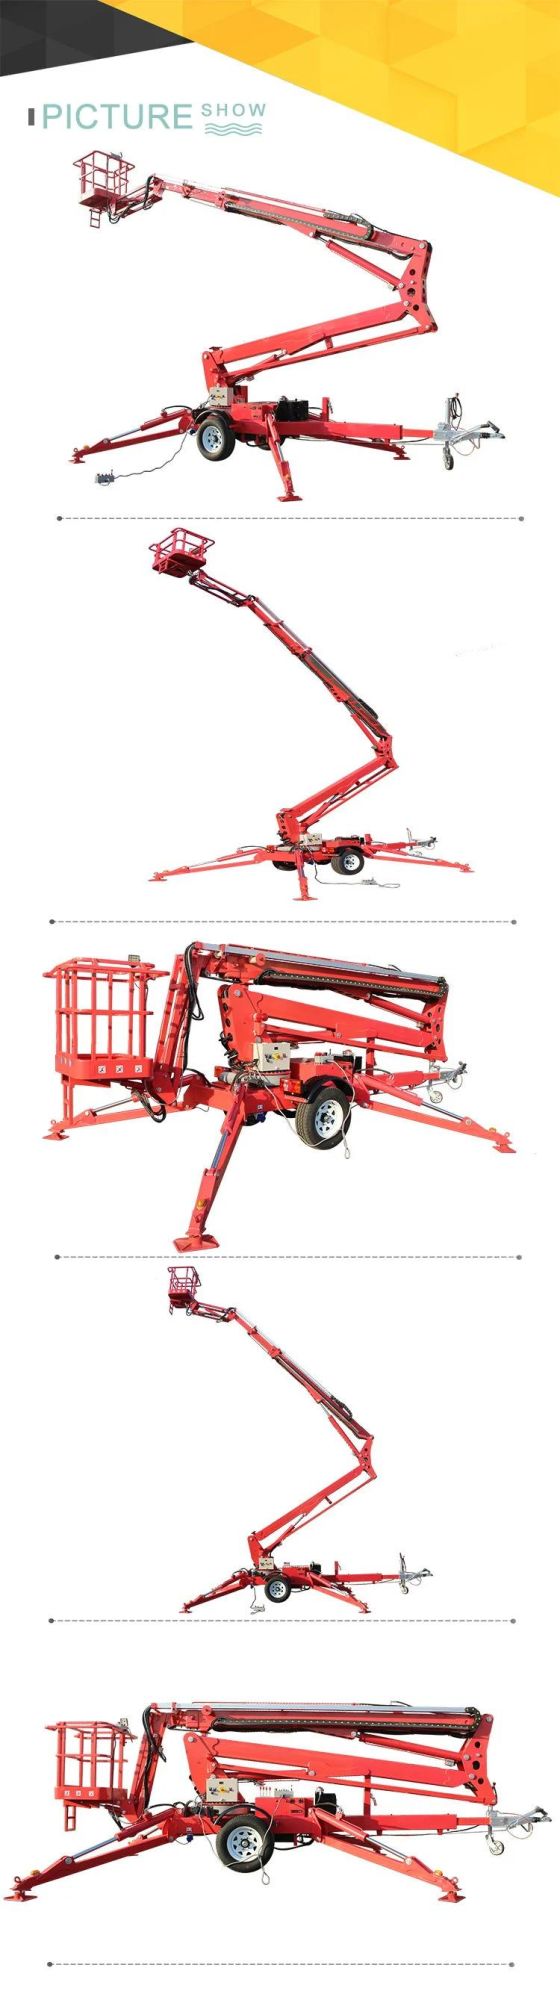 10m High Safety Construction Aerial Lift Equipment Adjustable Cherry Picker